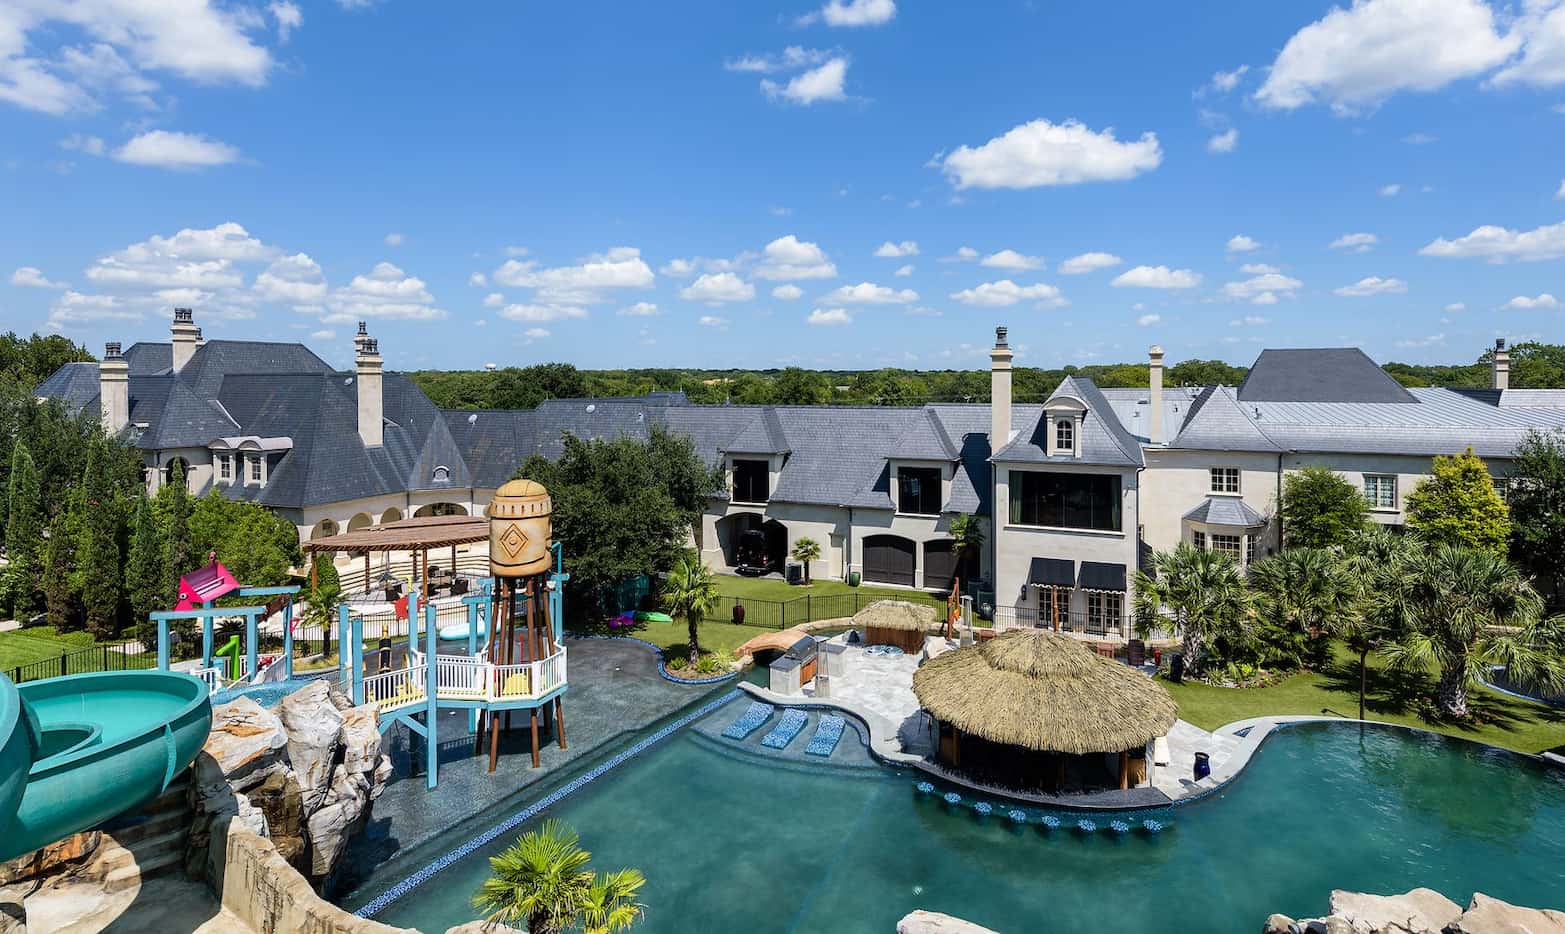 The more than four acre Preston Hollow estate has its own waterpark.